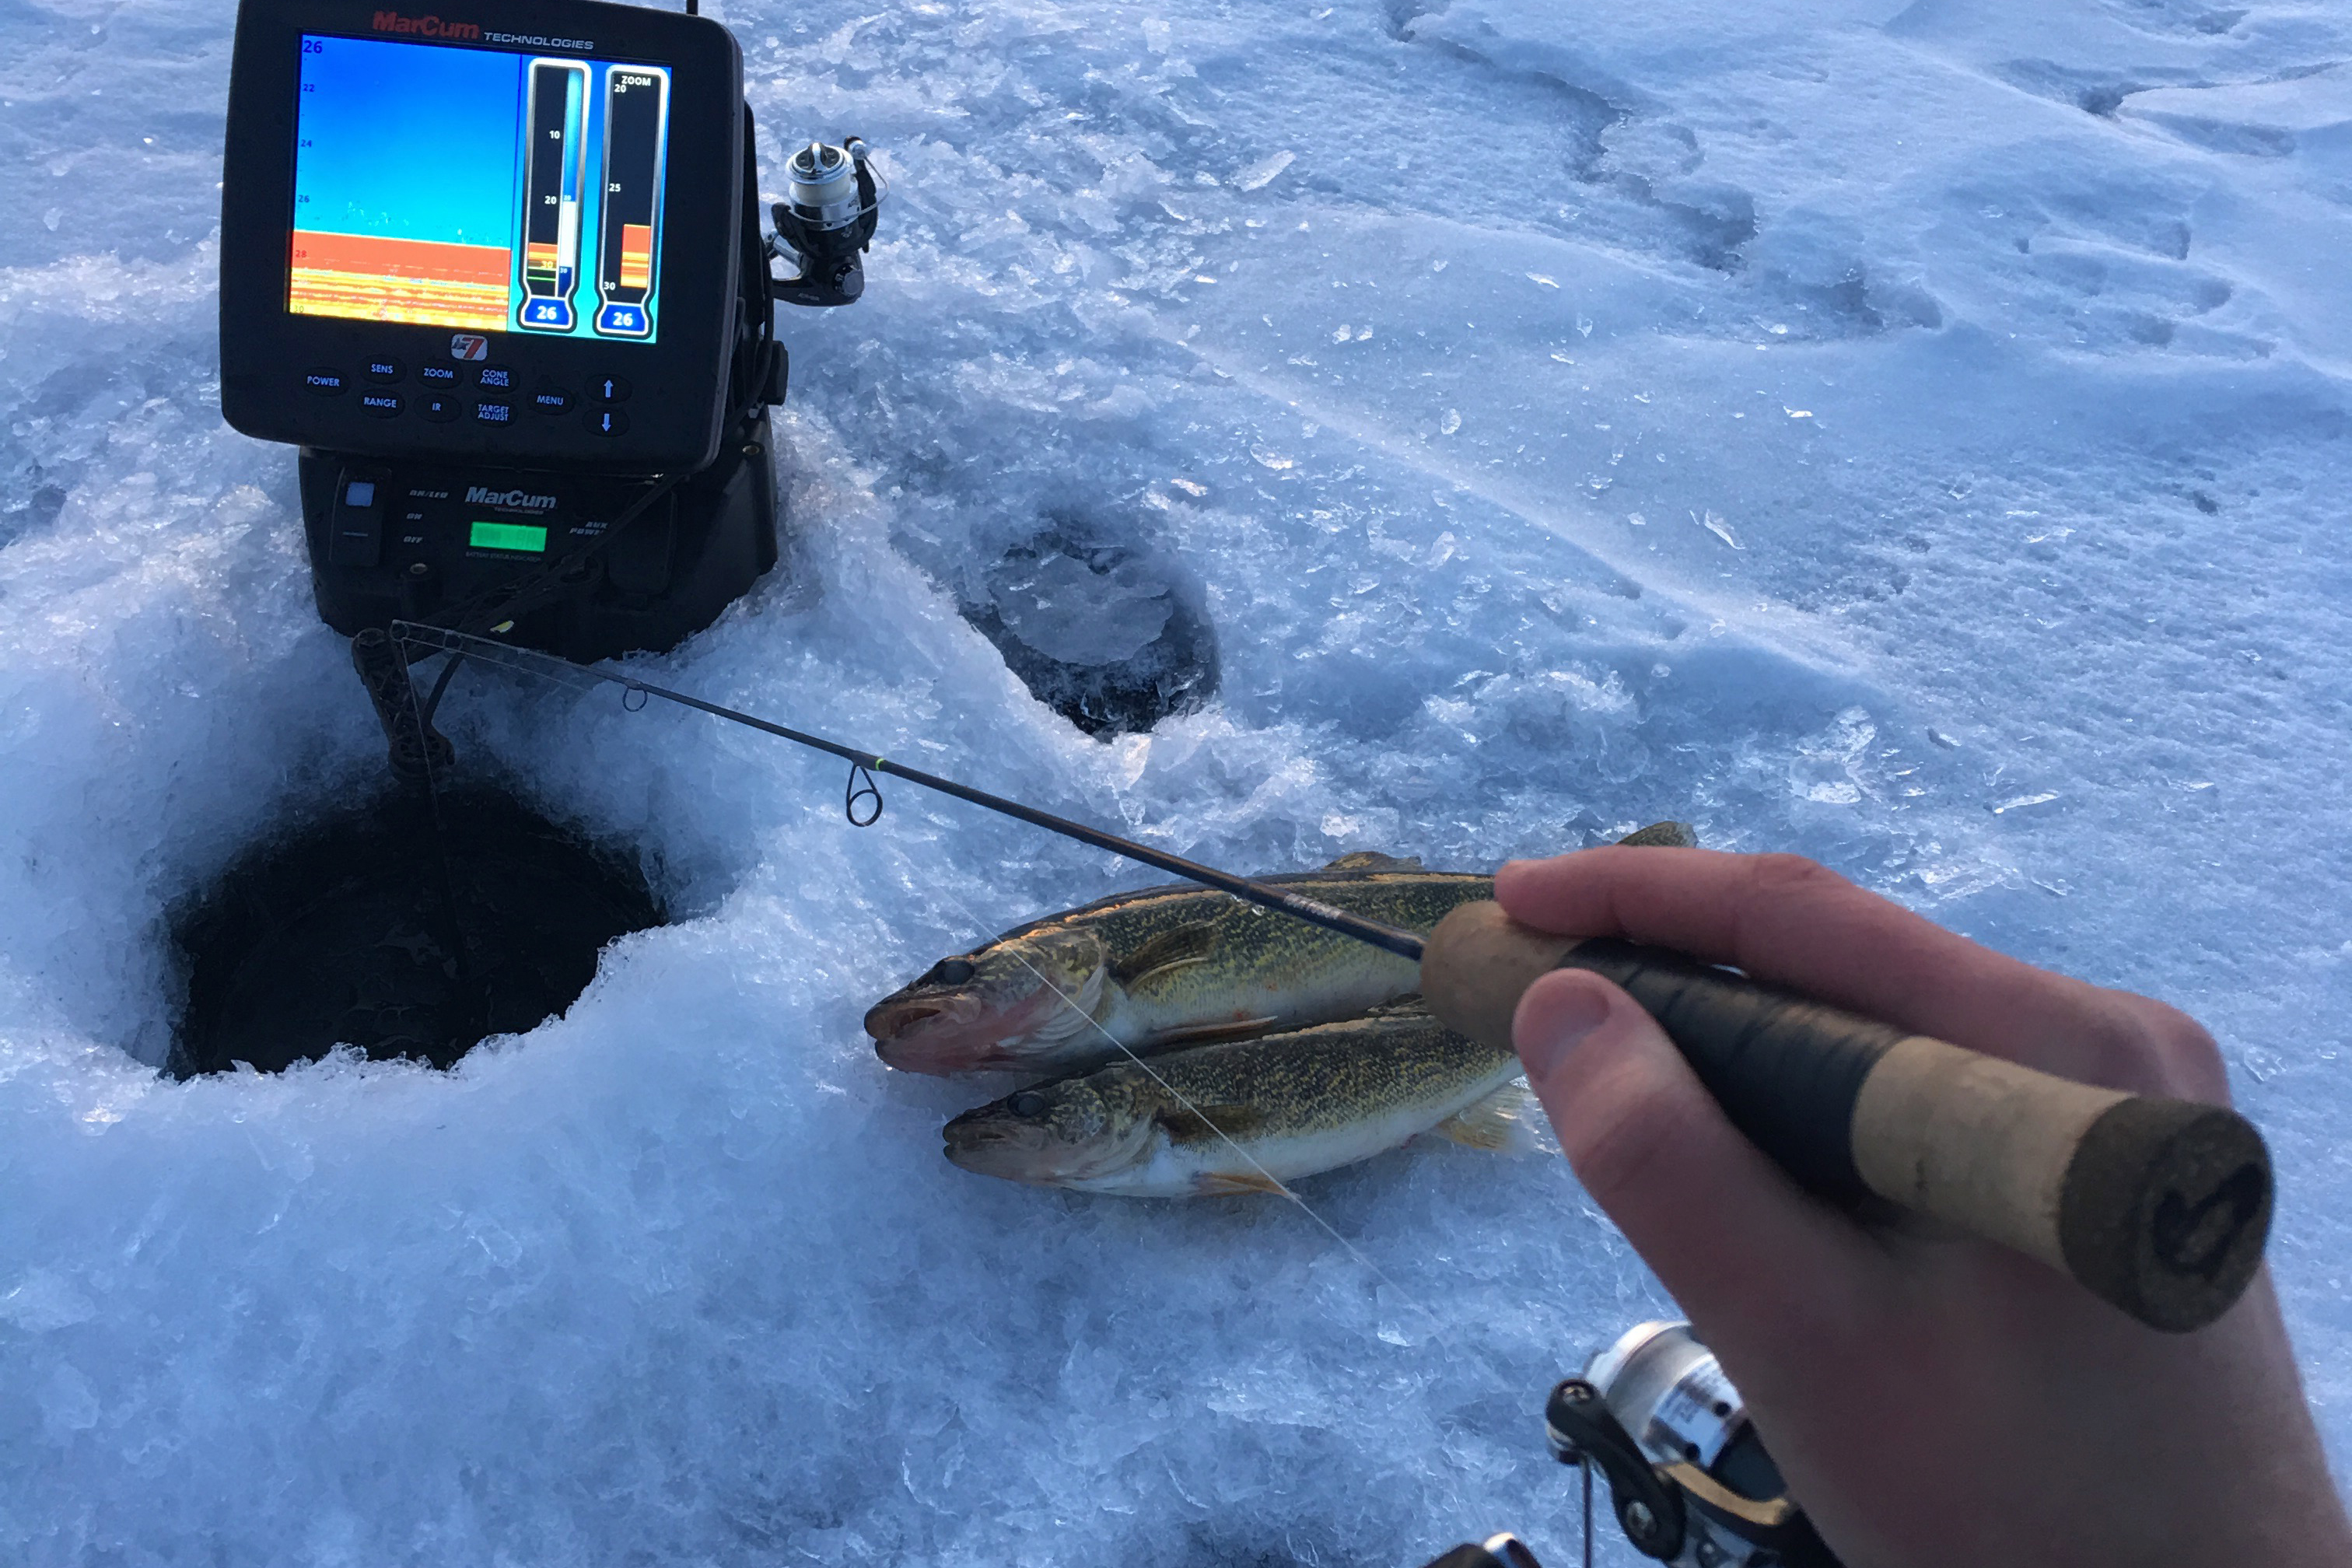 Ice fishing tips: Go-to baits and jigging tactics for first ice